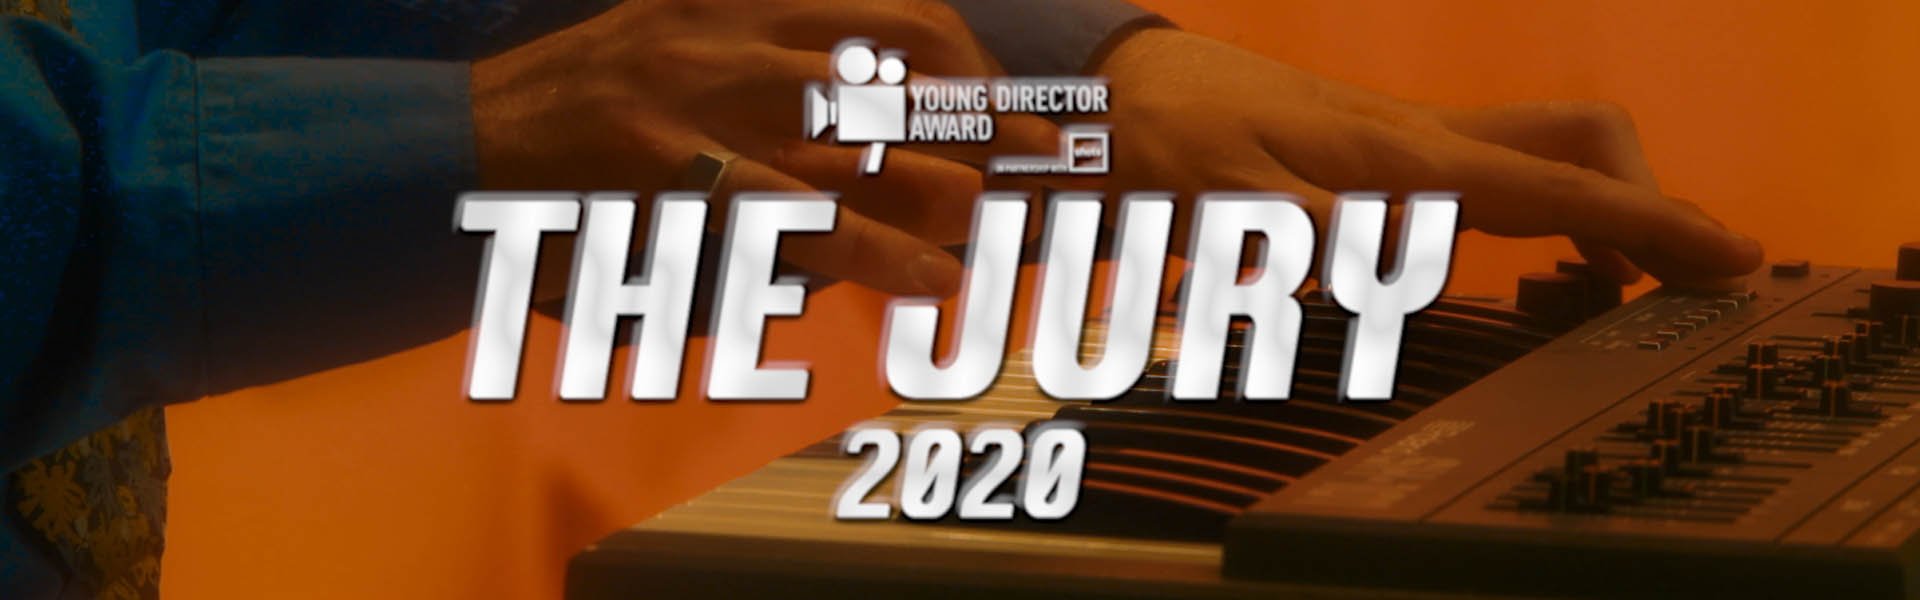 Young Director Award - The Jury 2020 [Commercial]